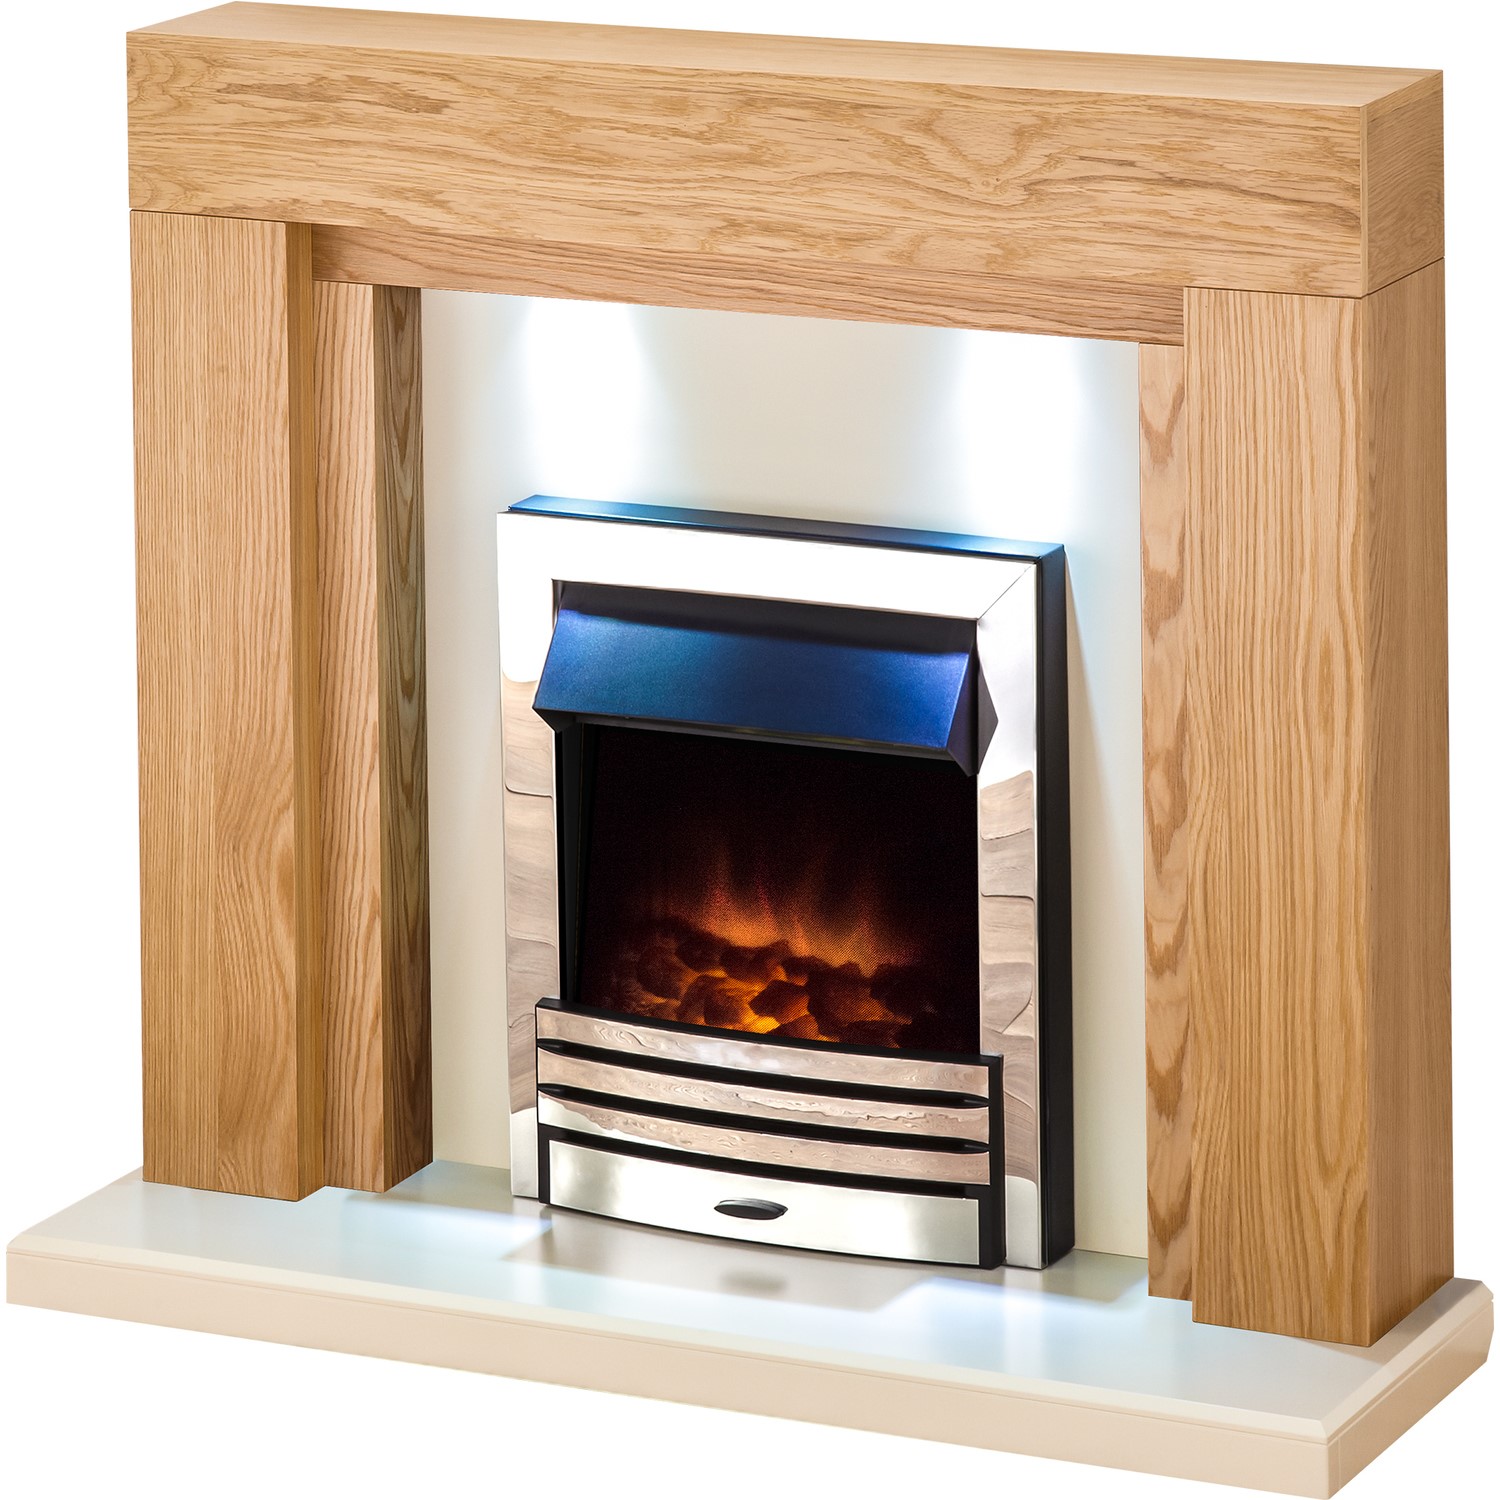 Read more about Adam oak and chrome electric fireplace suite beaumont